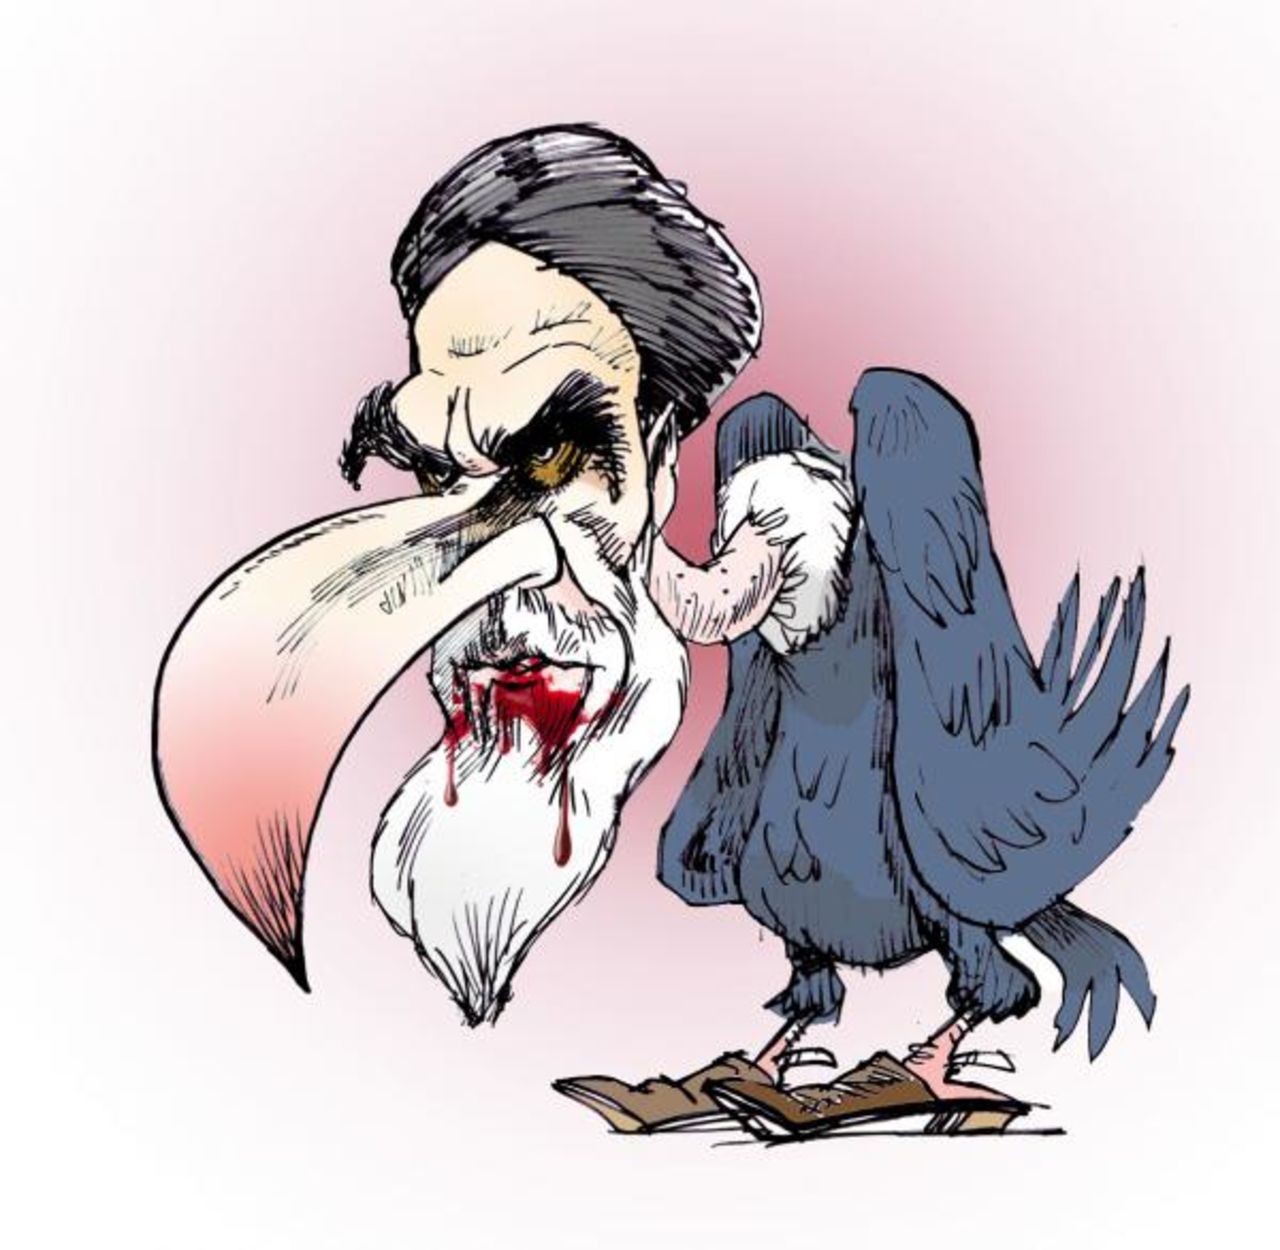 Kowsar, who says he was inspired by Animal Farm, continues to depict Iran's leaders in beastly form.